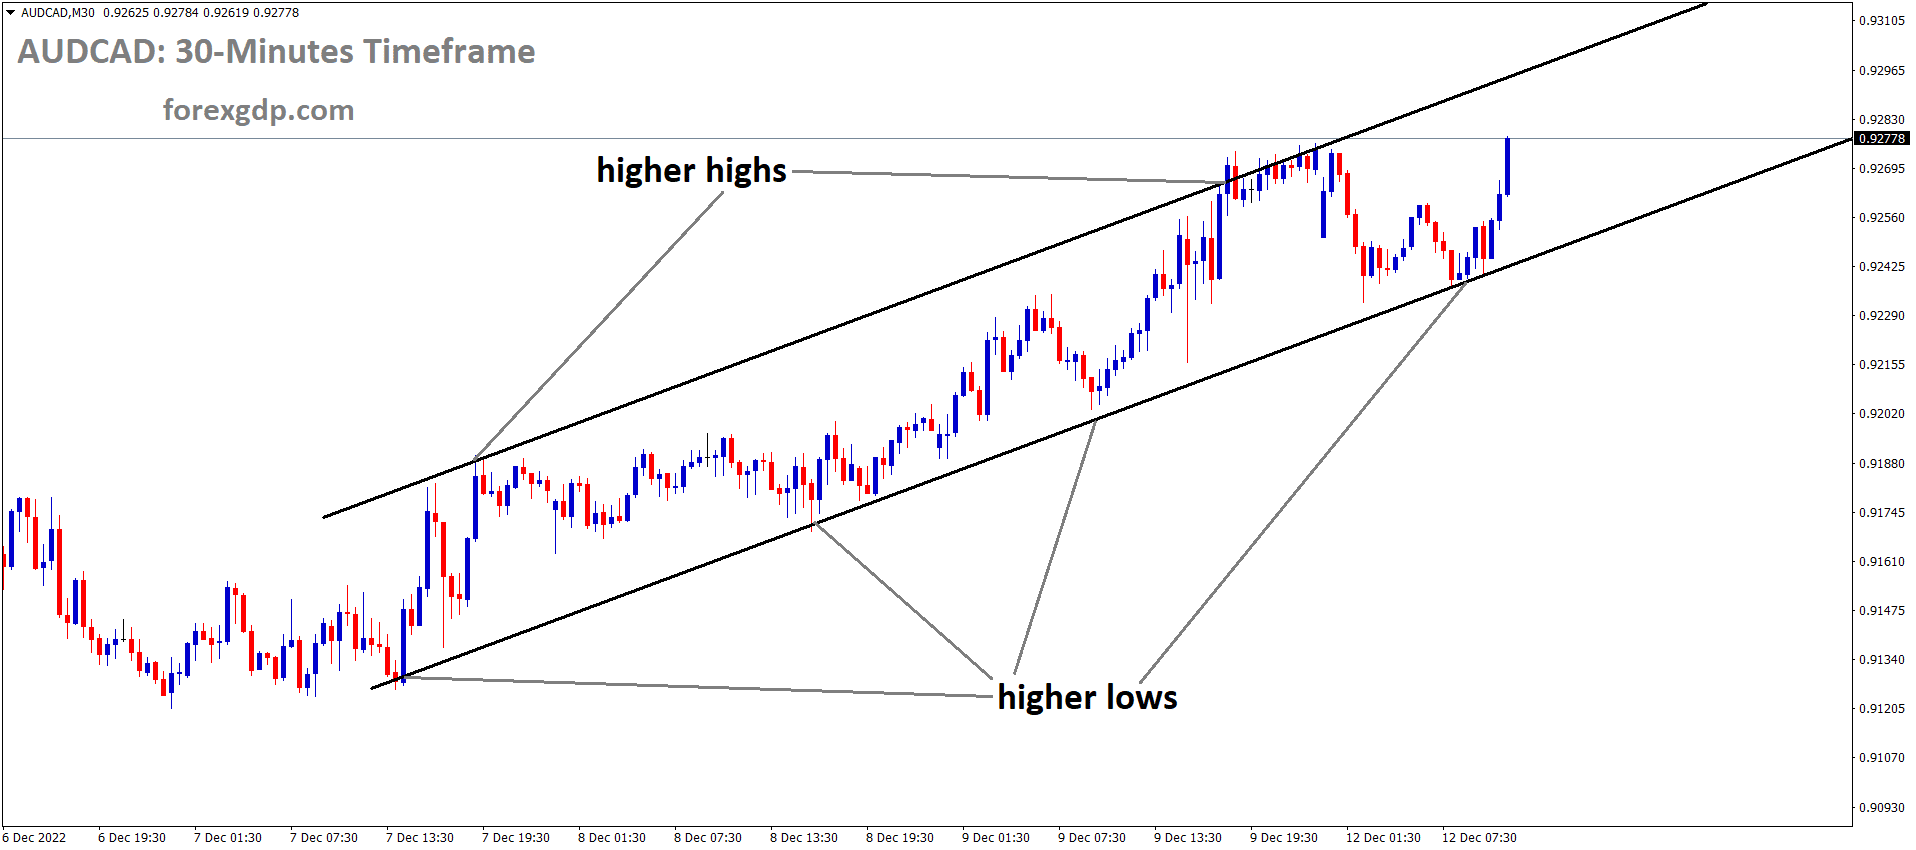 AUDCAD is moving in an Ascending channel and the market has rebounded from the higher low area of the channel